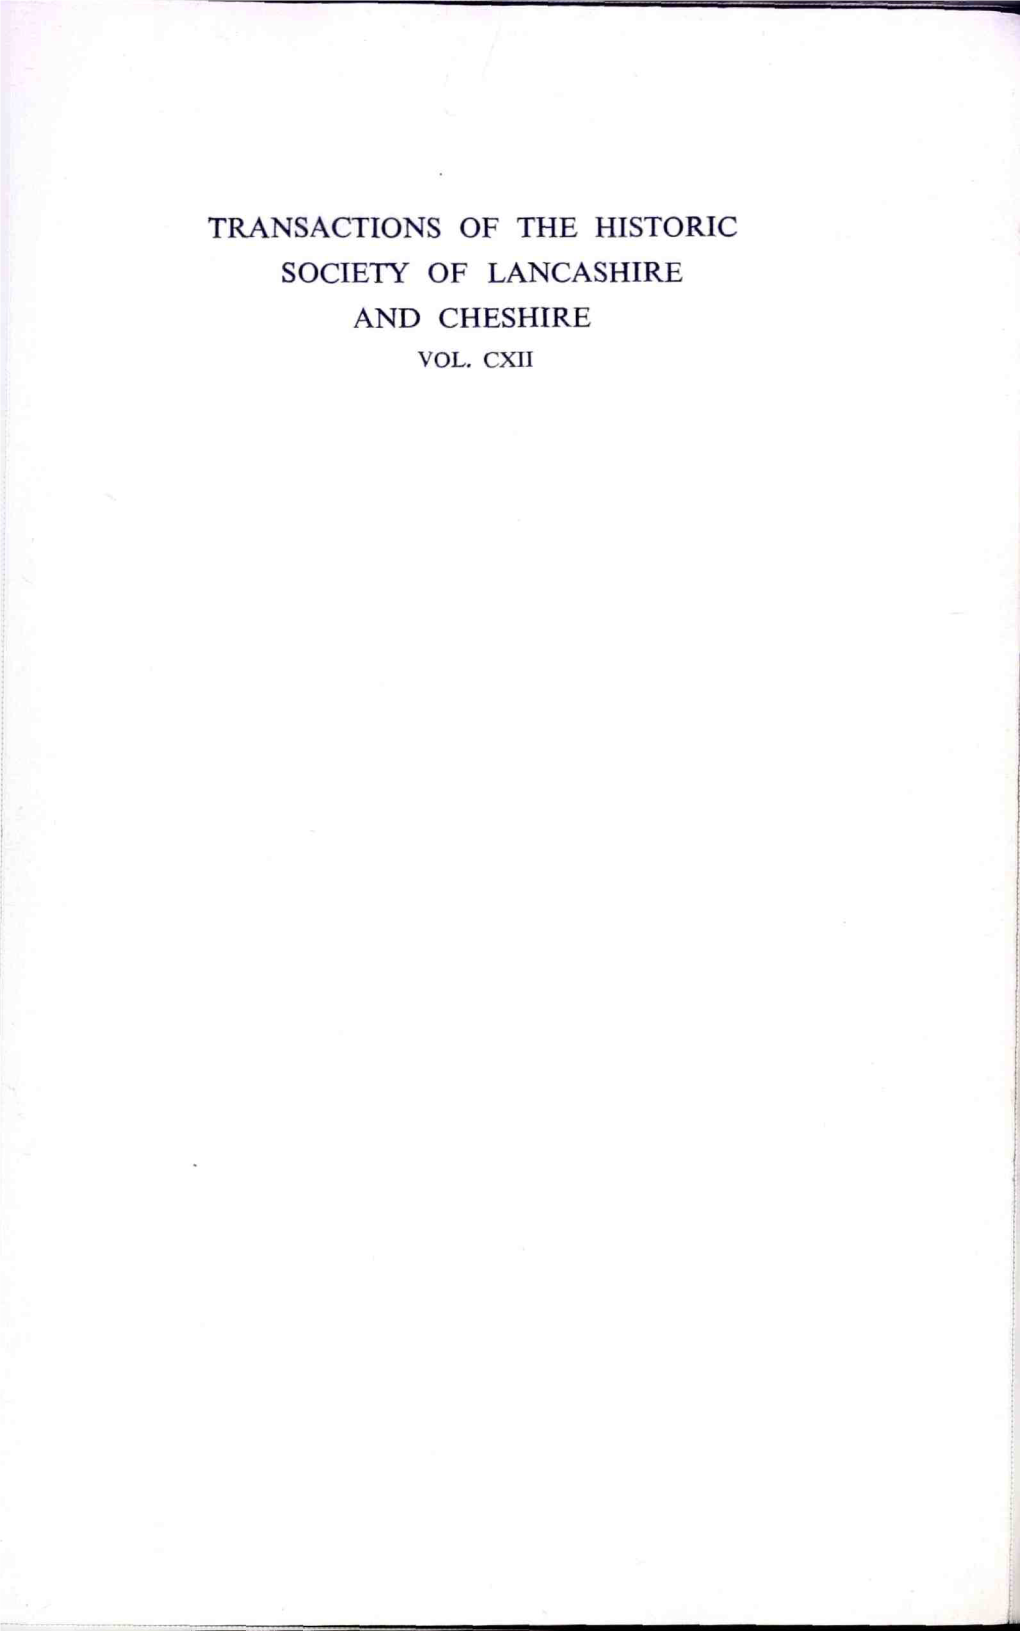 Transactions of the Historic Society of Lancashire and Cheshire Vol